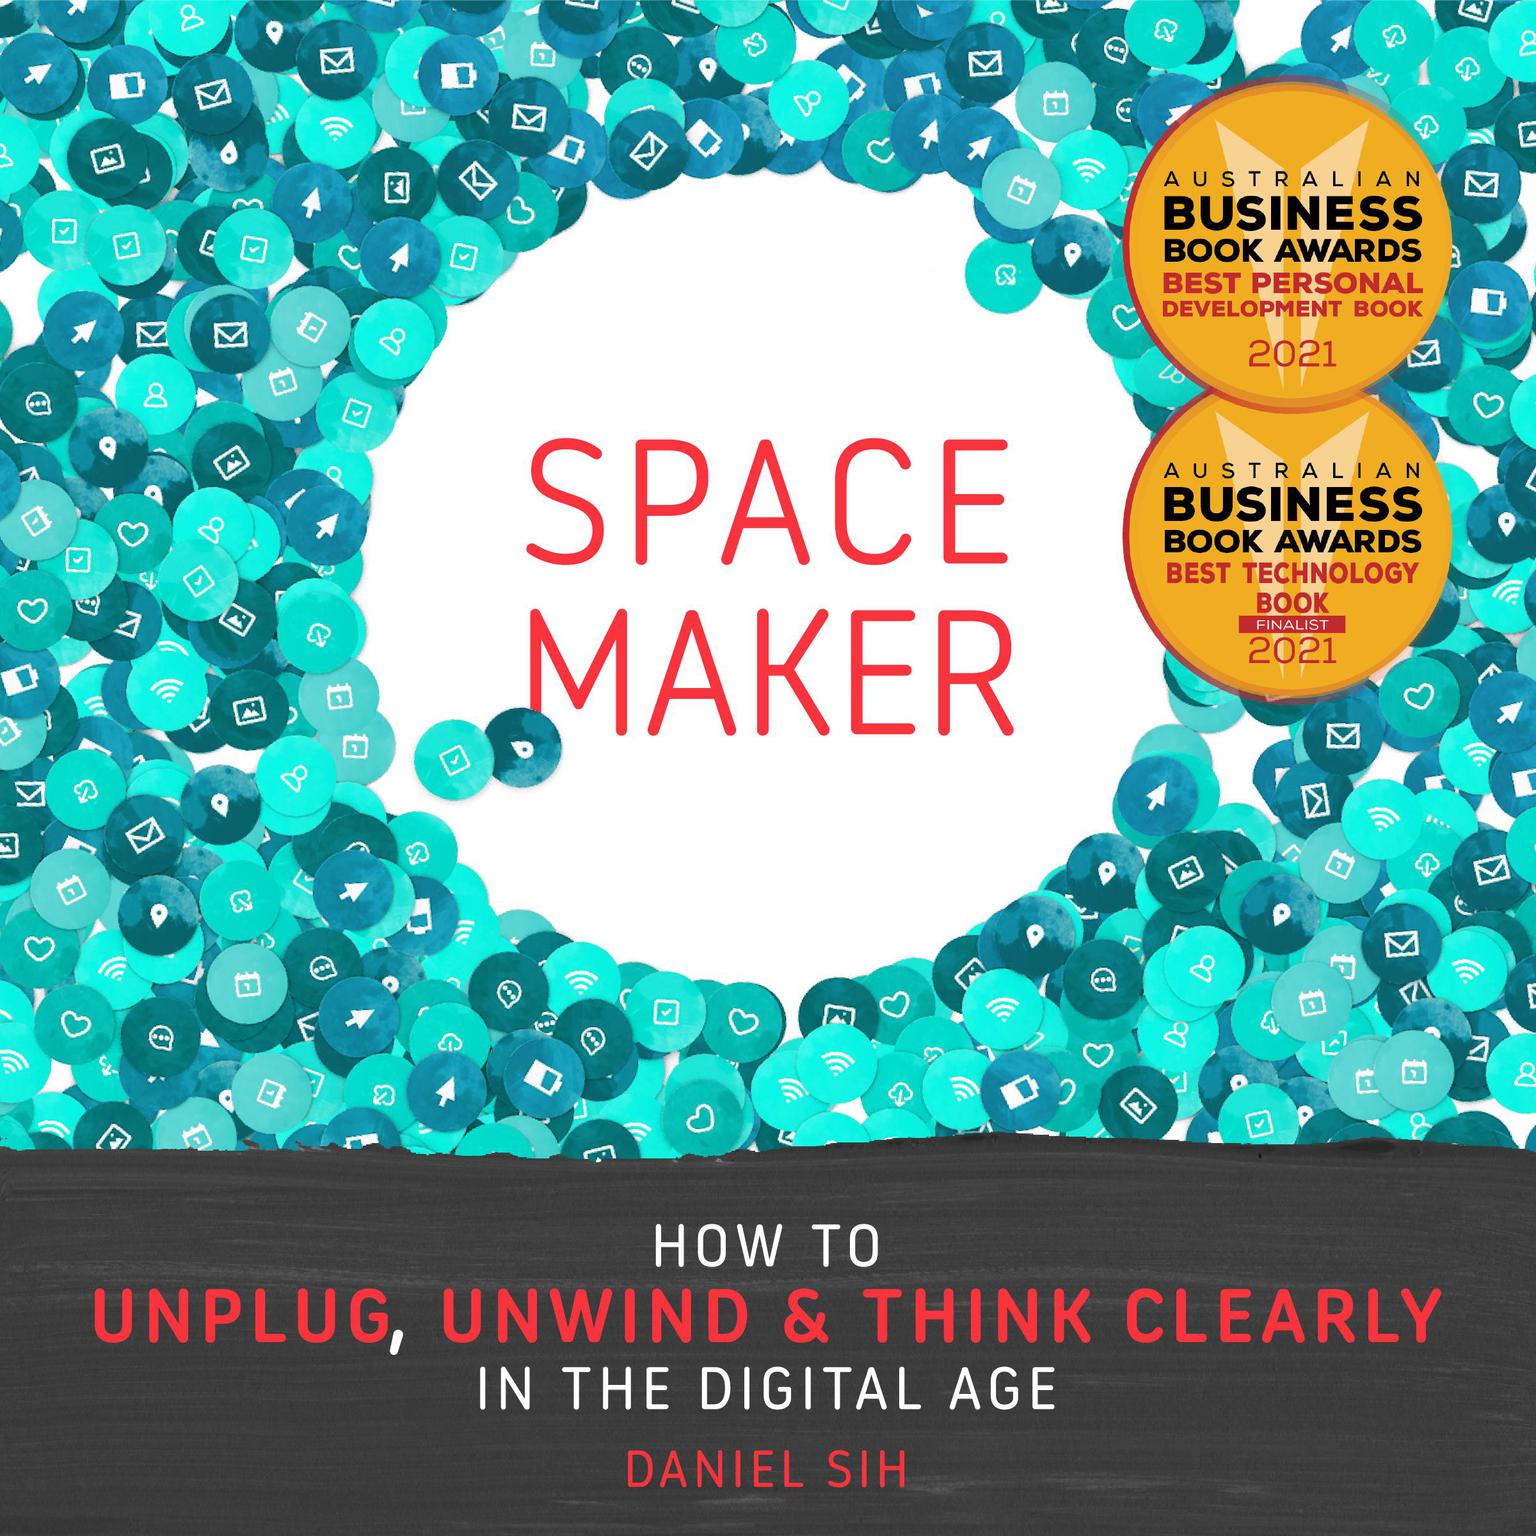 Spacemaker: How to unwind, unplug and think clearly in the digital age Audiobook, by Daniel Sih